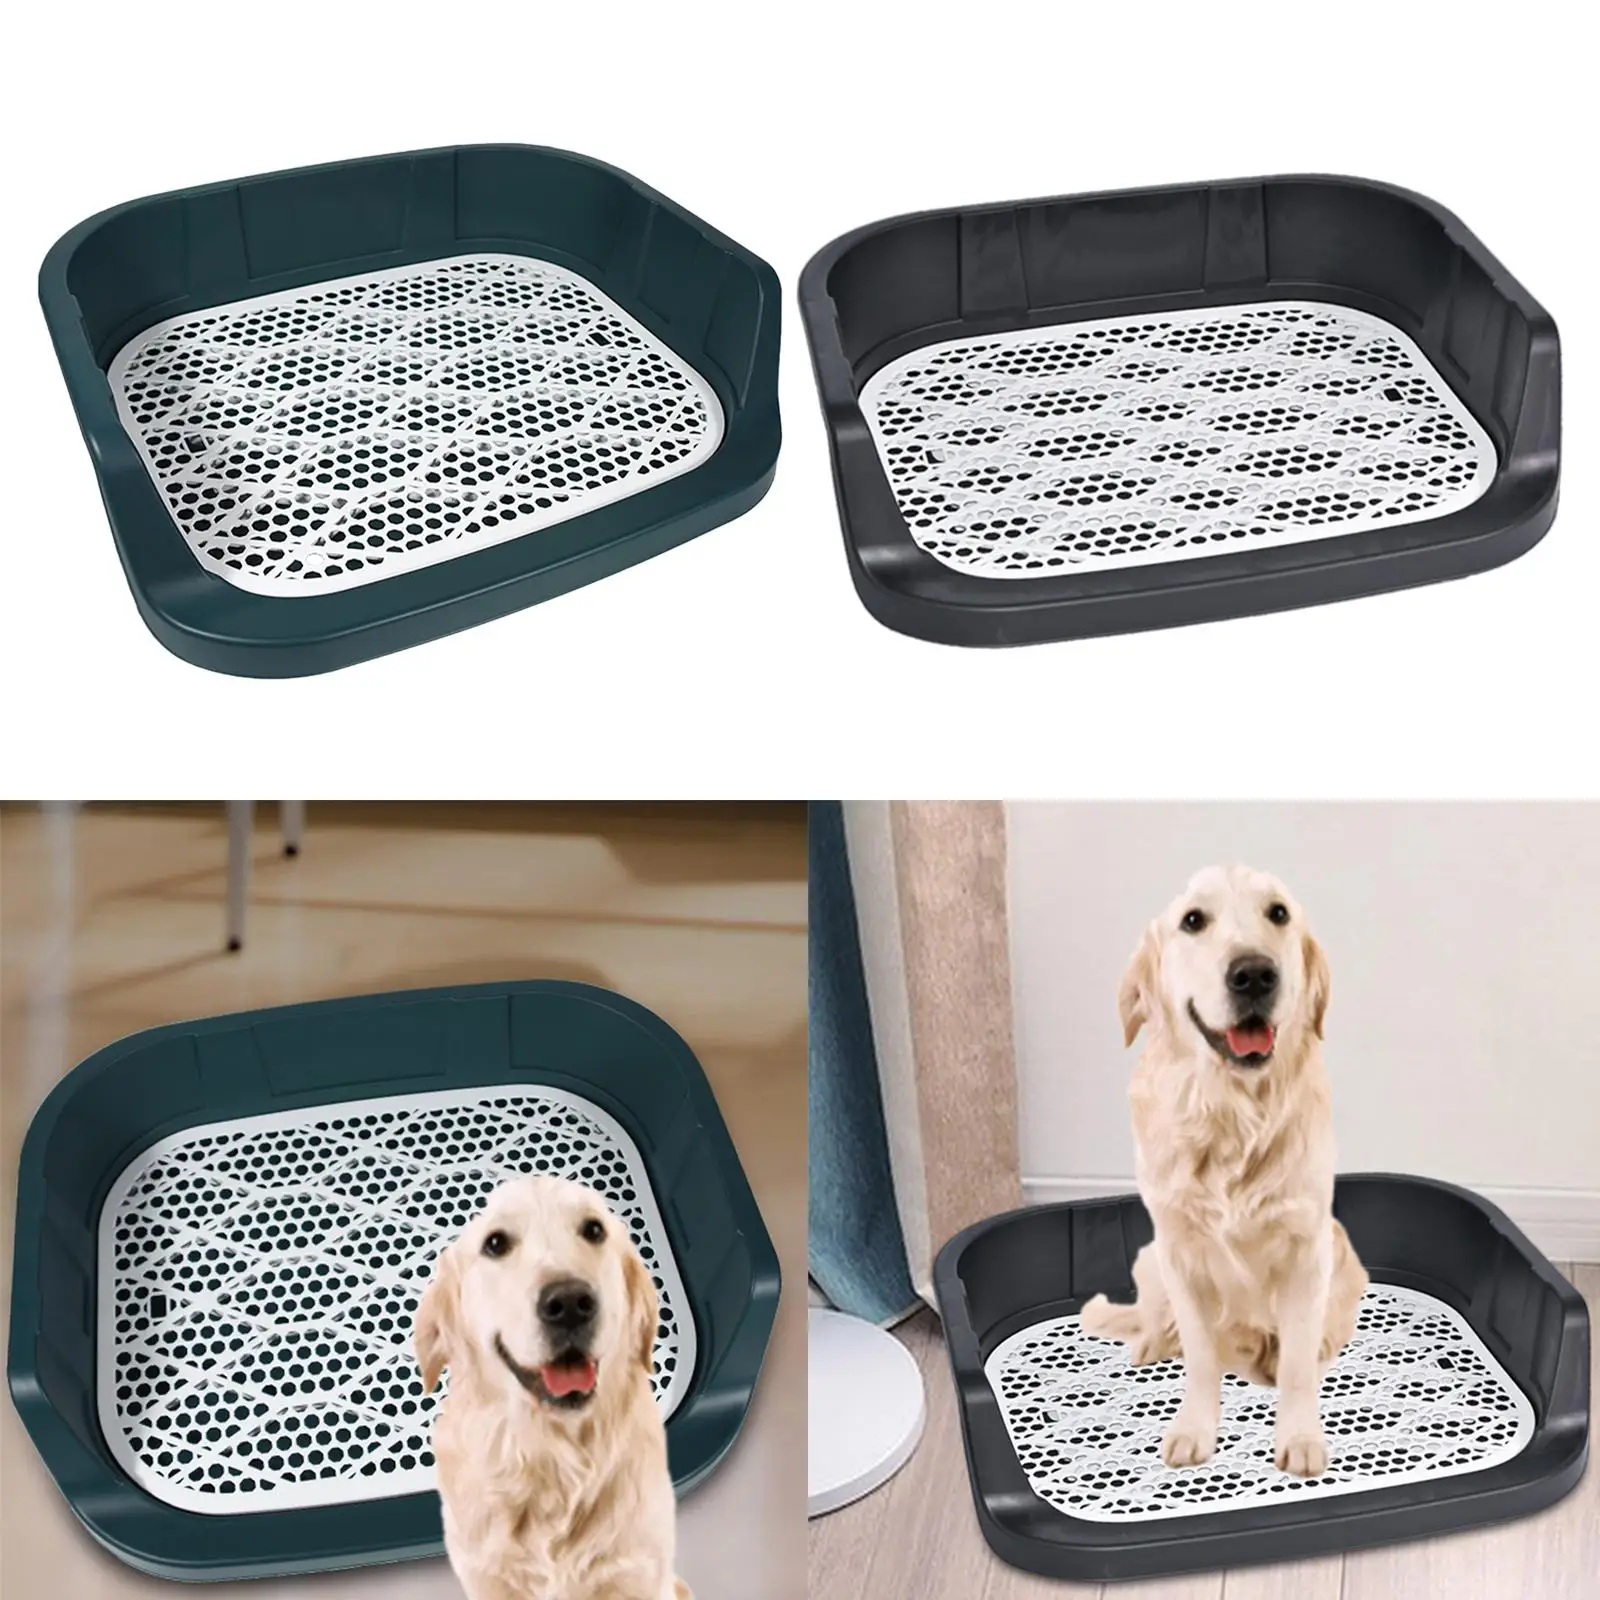 Open Top Dog Litter Box Cats Potty Toilet Container, Deep Pee Loo Pad Holder Pan